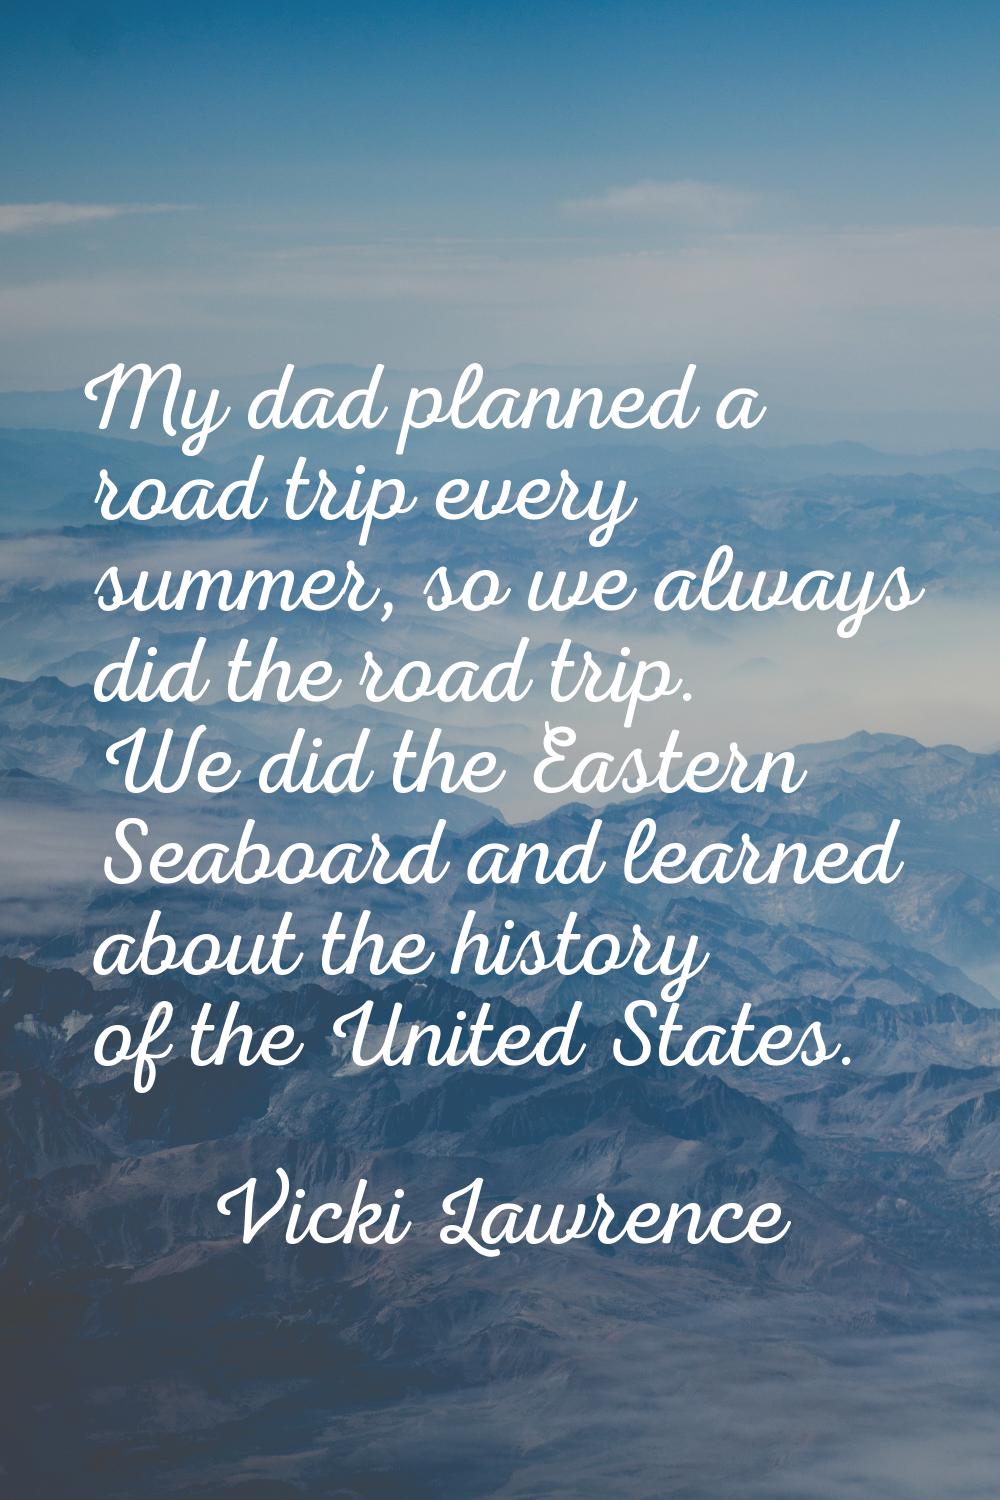 My dad planned a road trip every summer, so we always did the road trip. We did the Eastern Seaboar